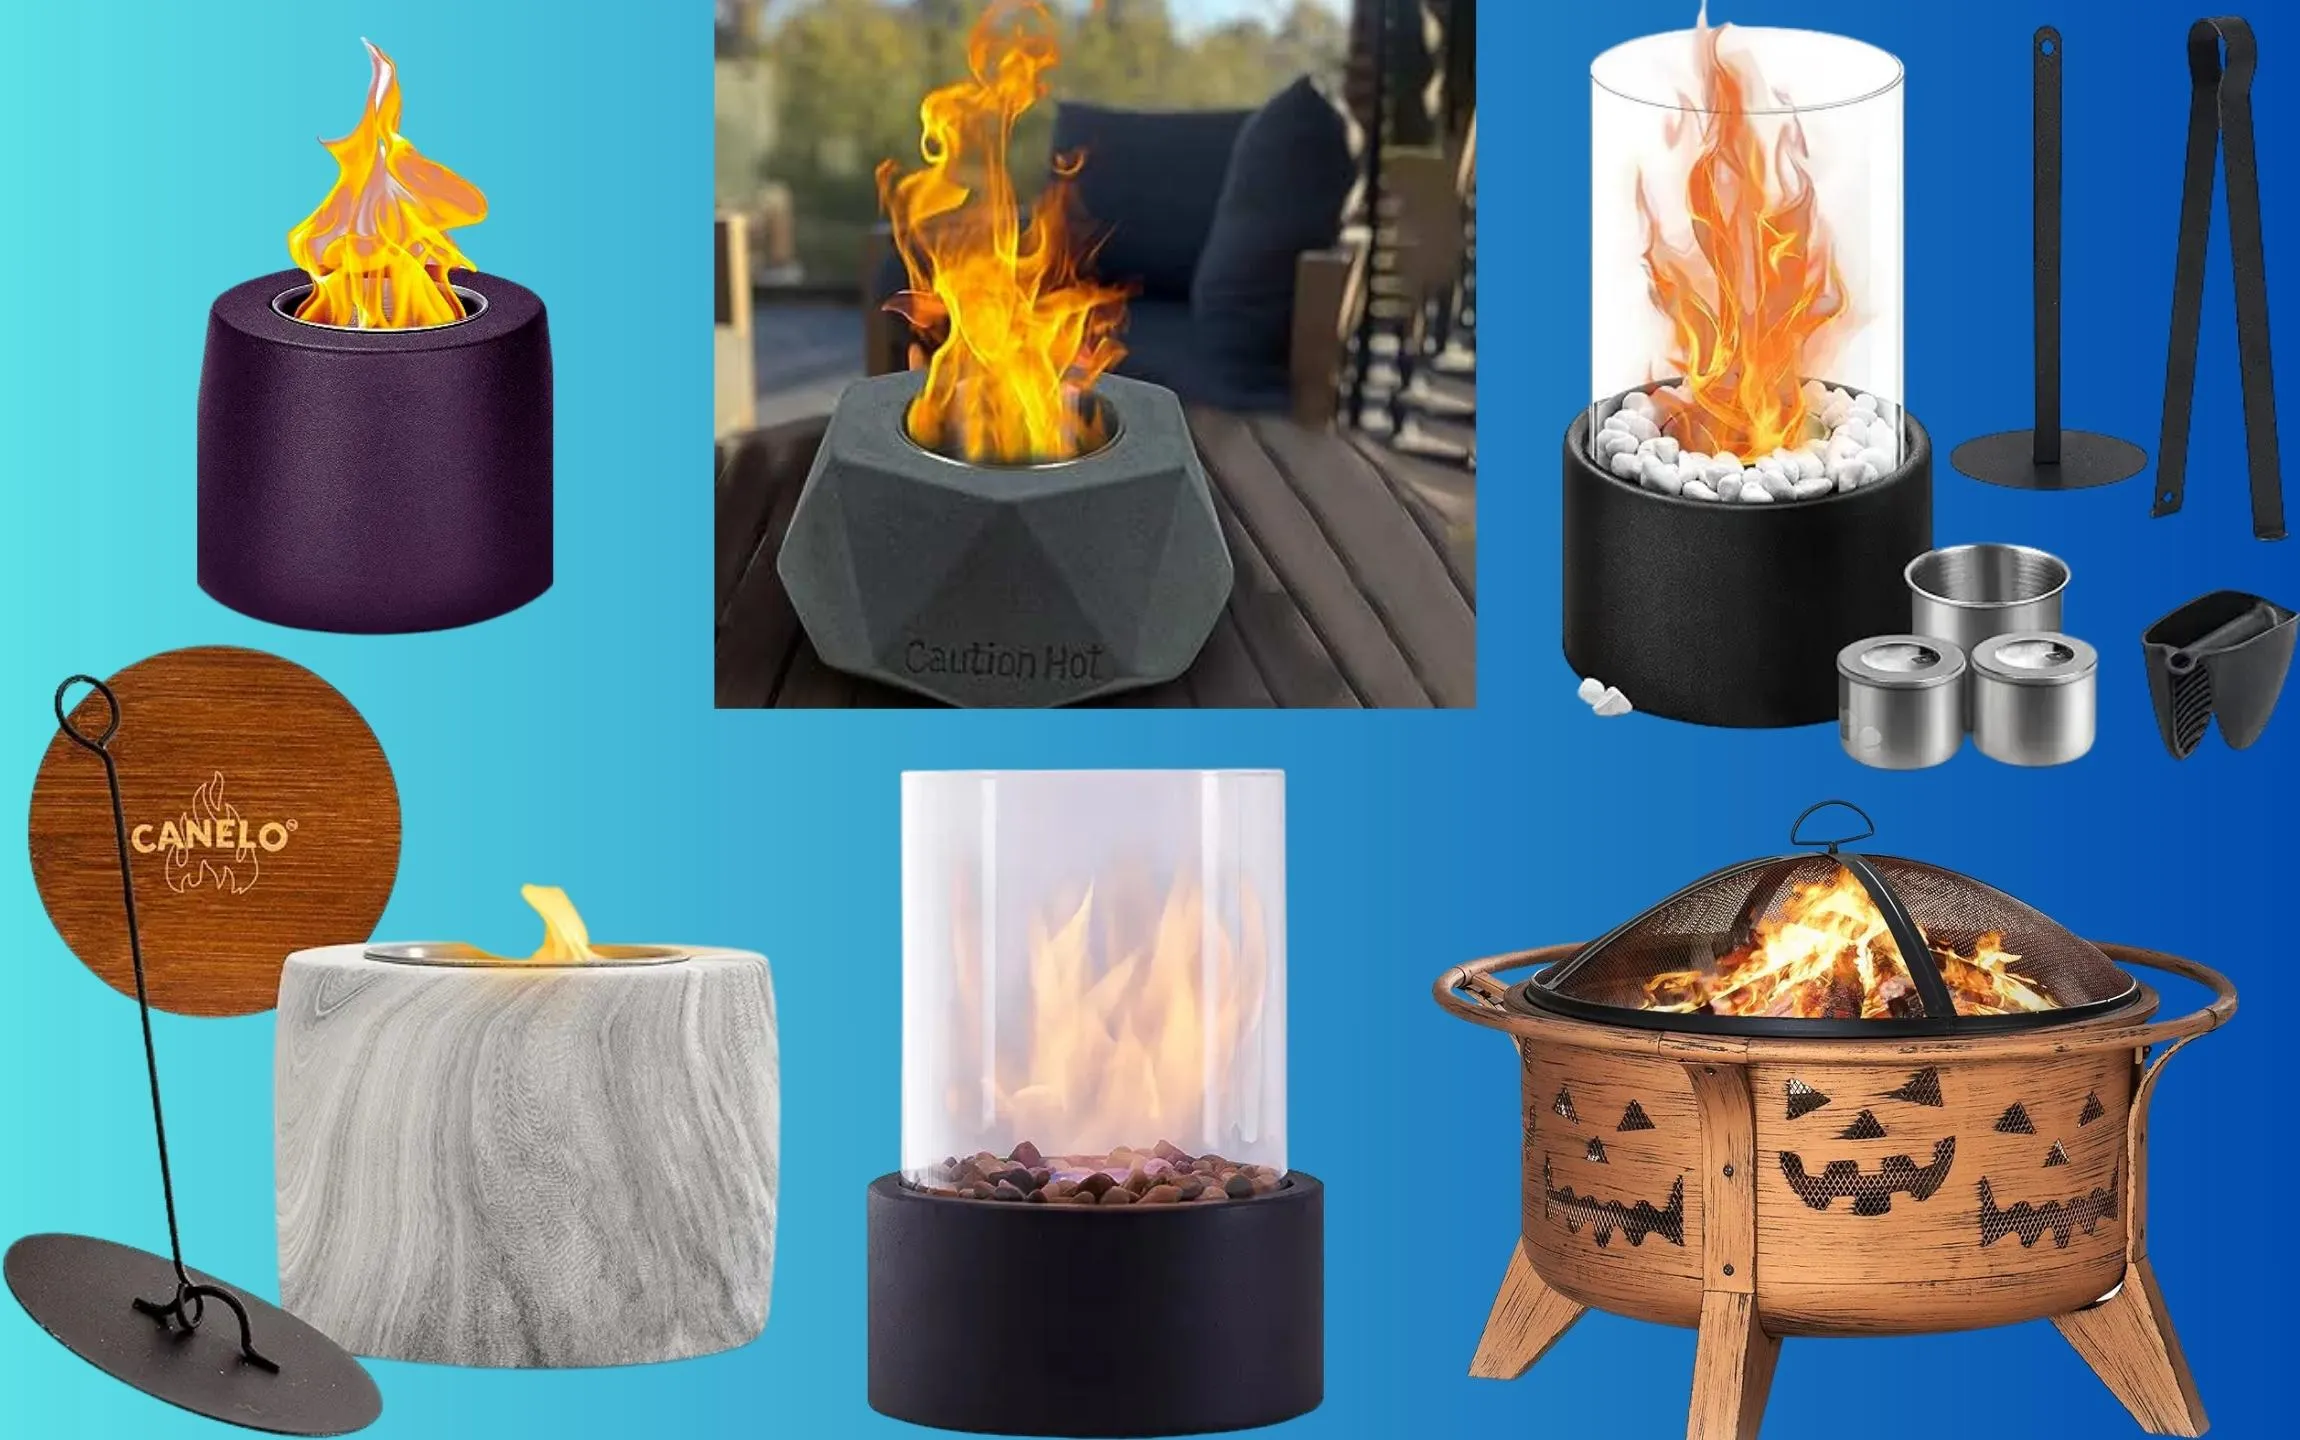 The Mesa Tabletop Fire Pit